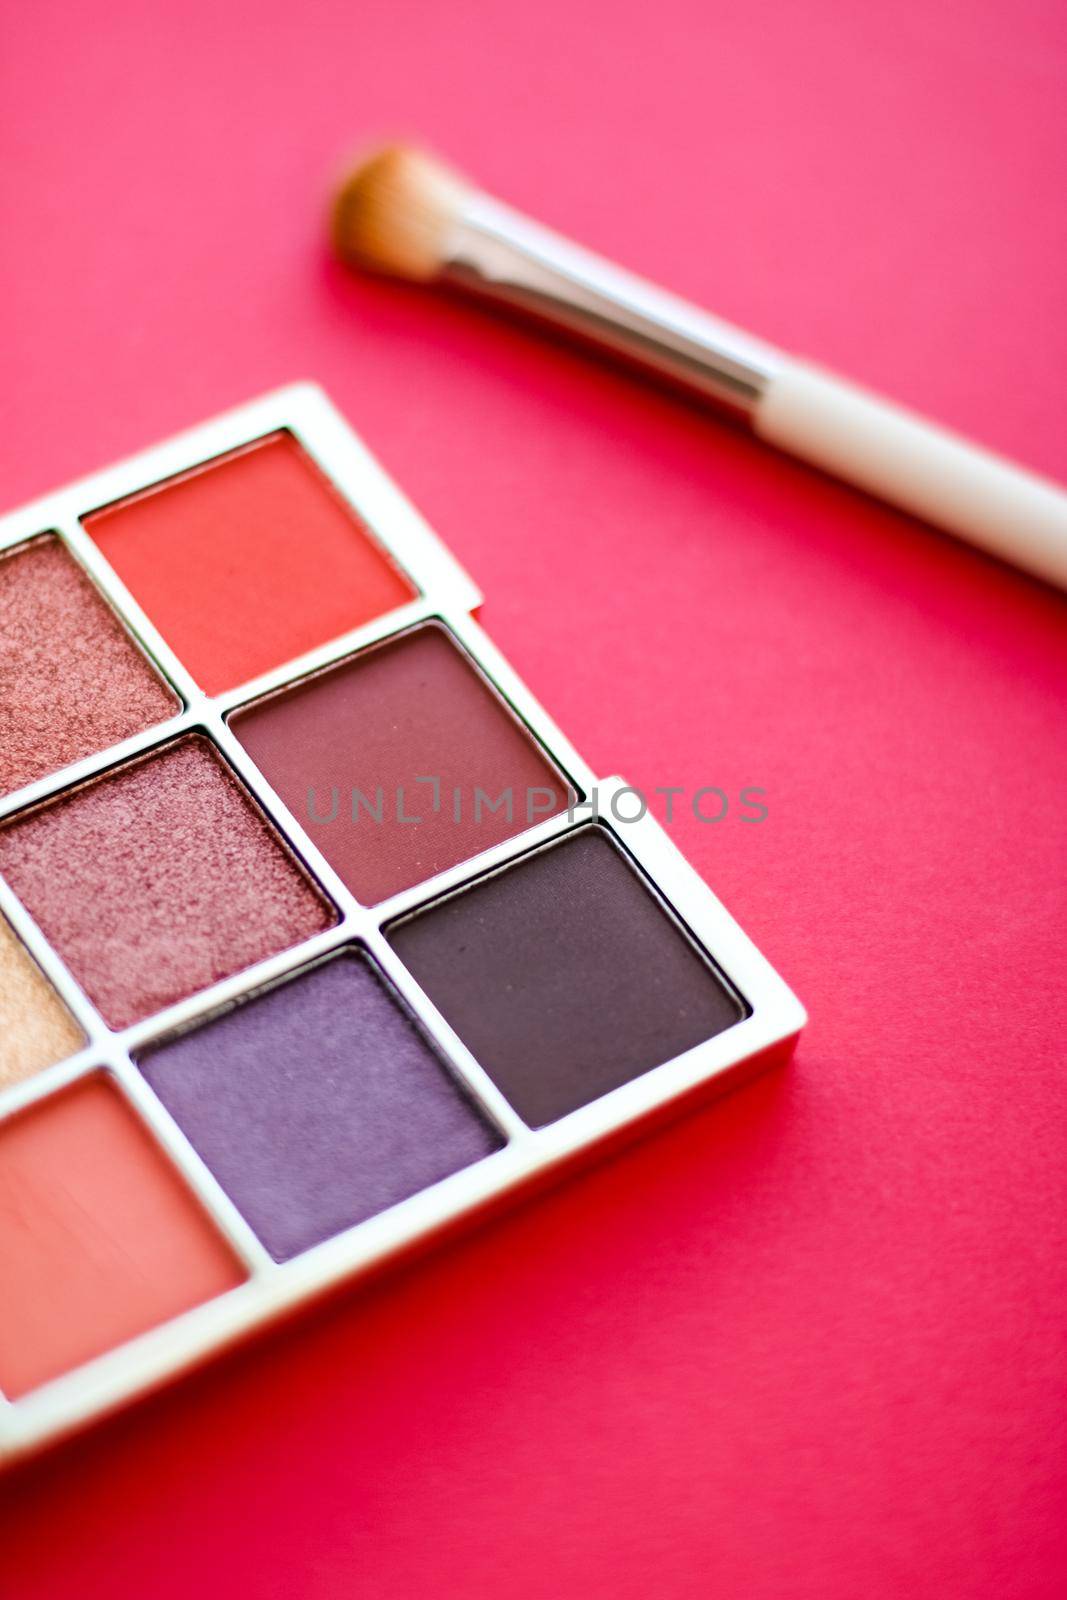 Eyeshadow palette and make-up brush on red background, eye shadows cosmetics product for luxury beauty brand promotion and holiday fashion blog design by Anneleven